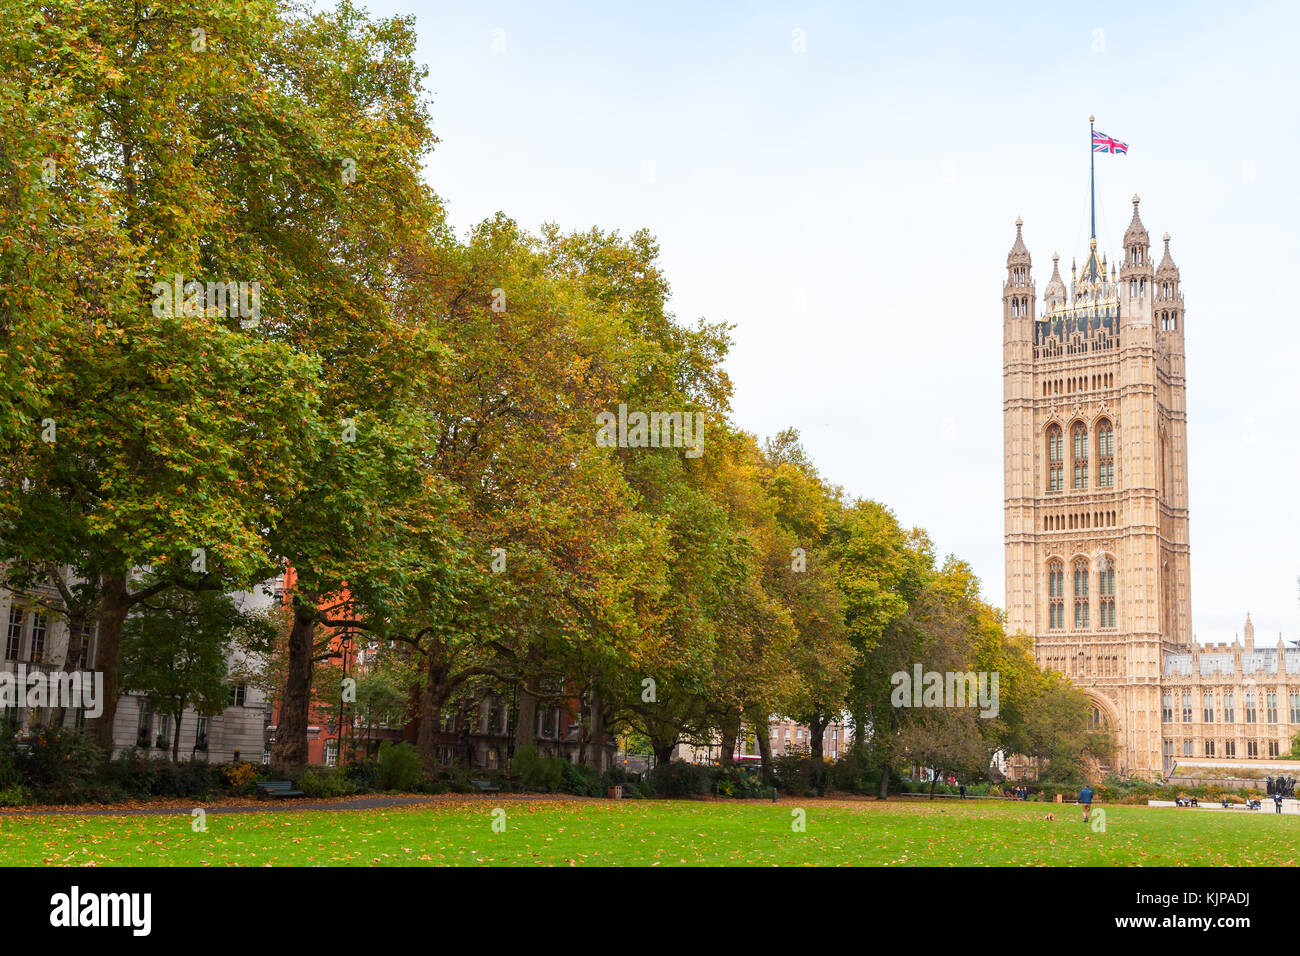 Victoria Tower,  square tower at the south-west end of the Palace of Westminster in London, United Kingdom. View from Victoria Tower gardens Stock Photo